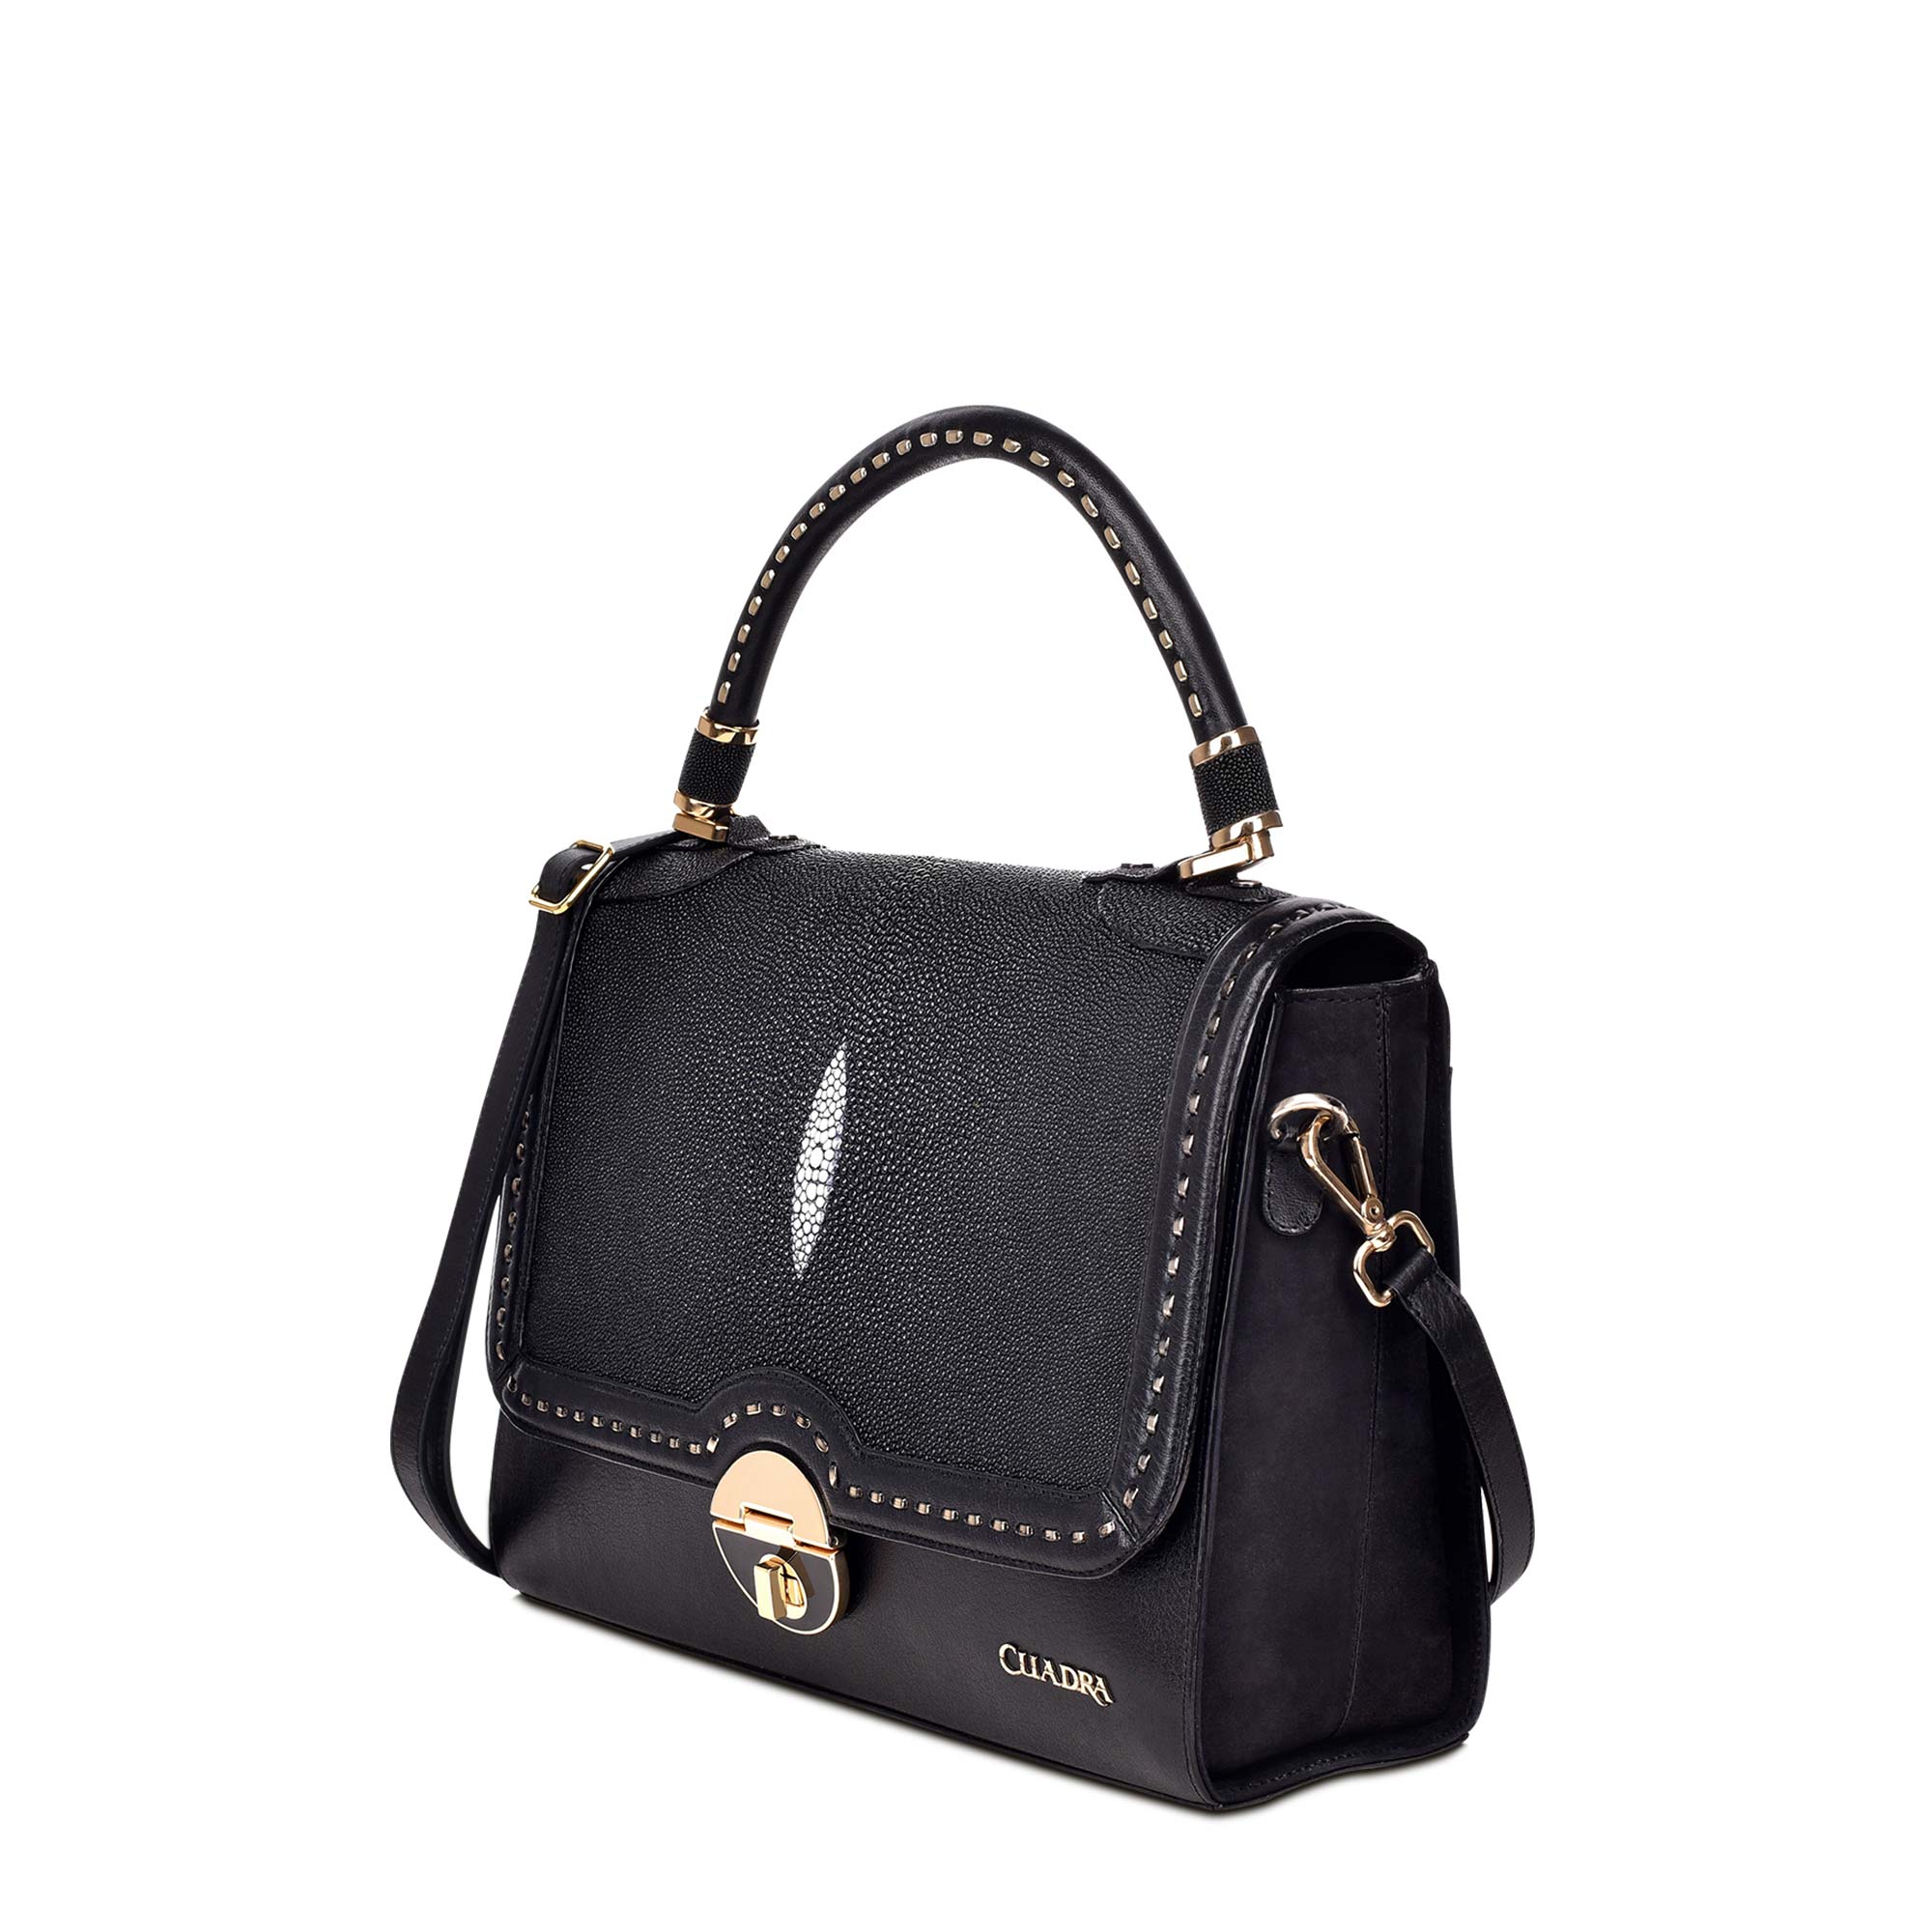 Small Dome Satchel Purse with Two Handles in Black